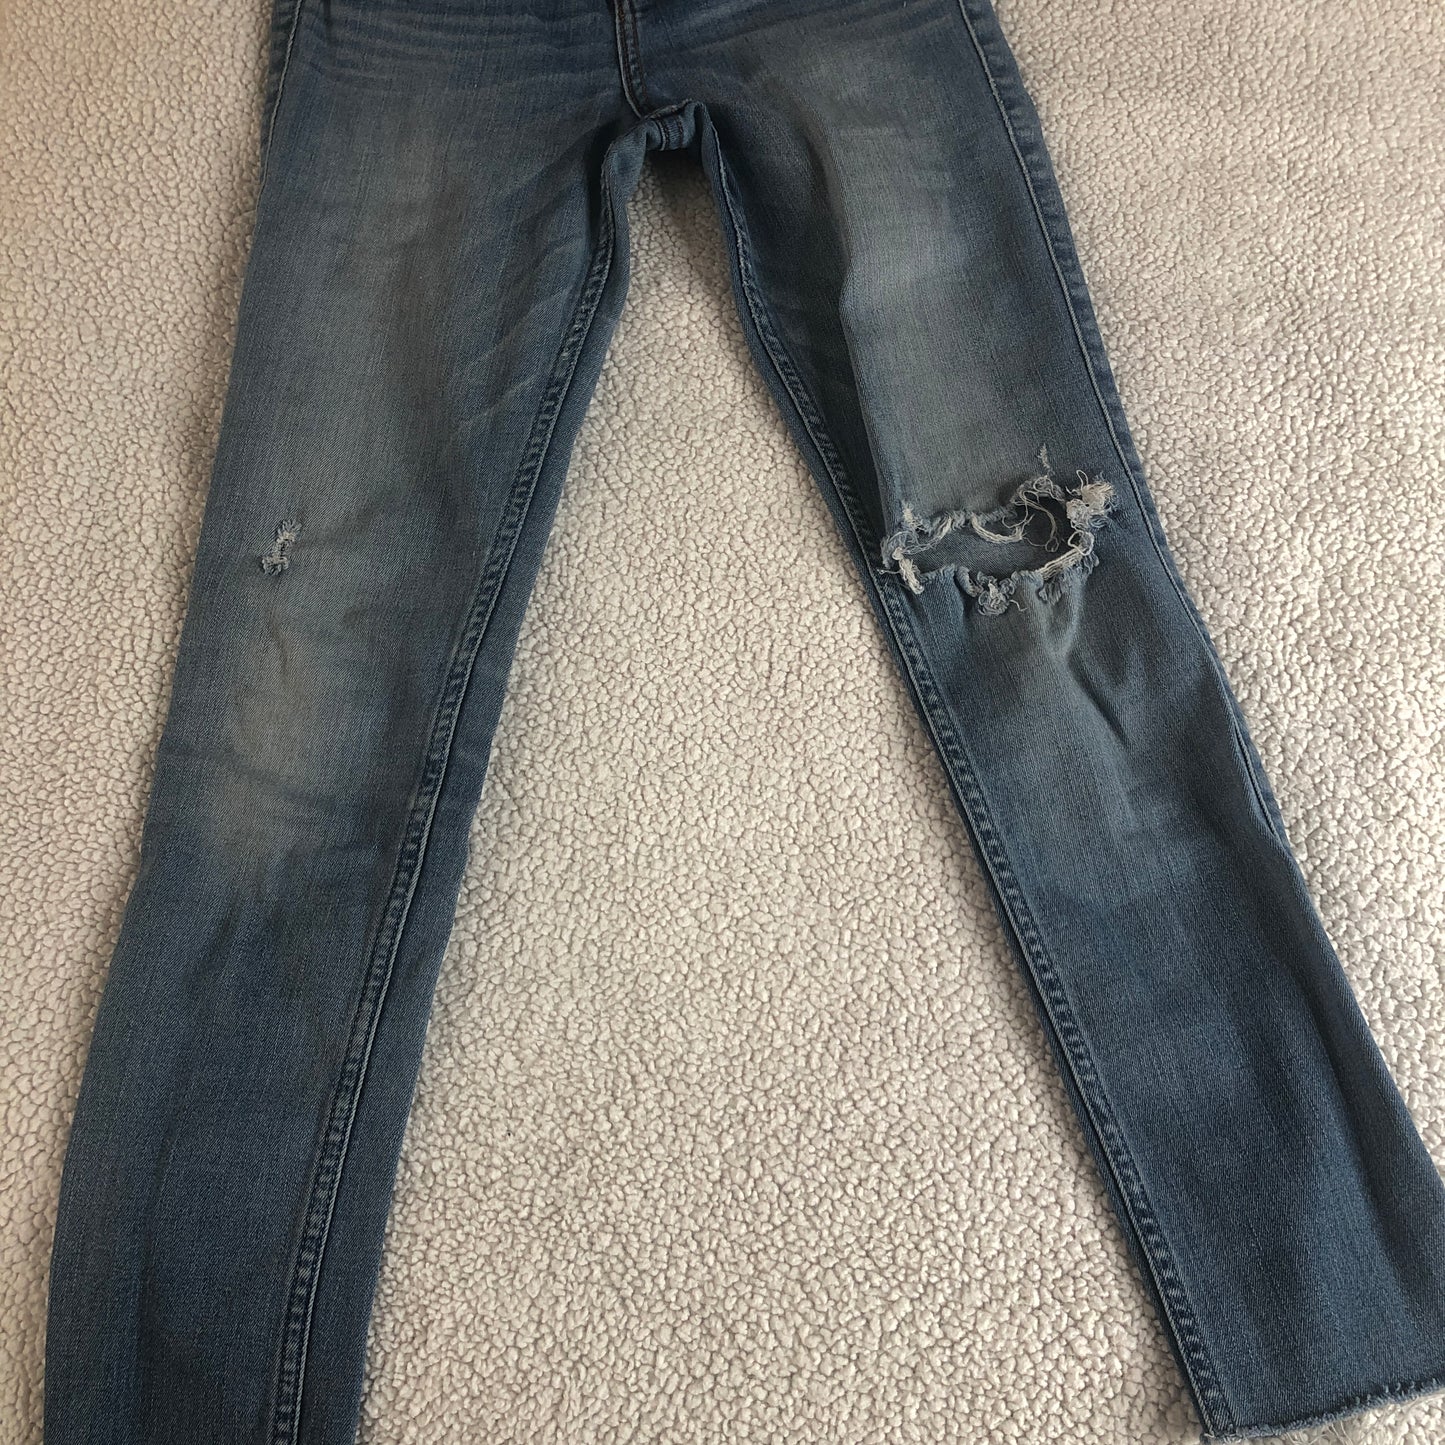 Abercrombie & Fitch distressed ripped raw hem light wash straight leg jeans